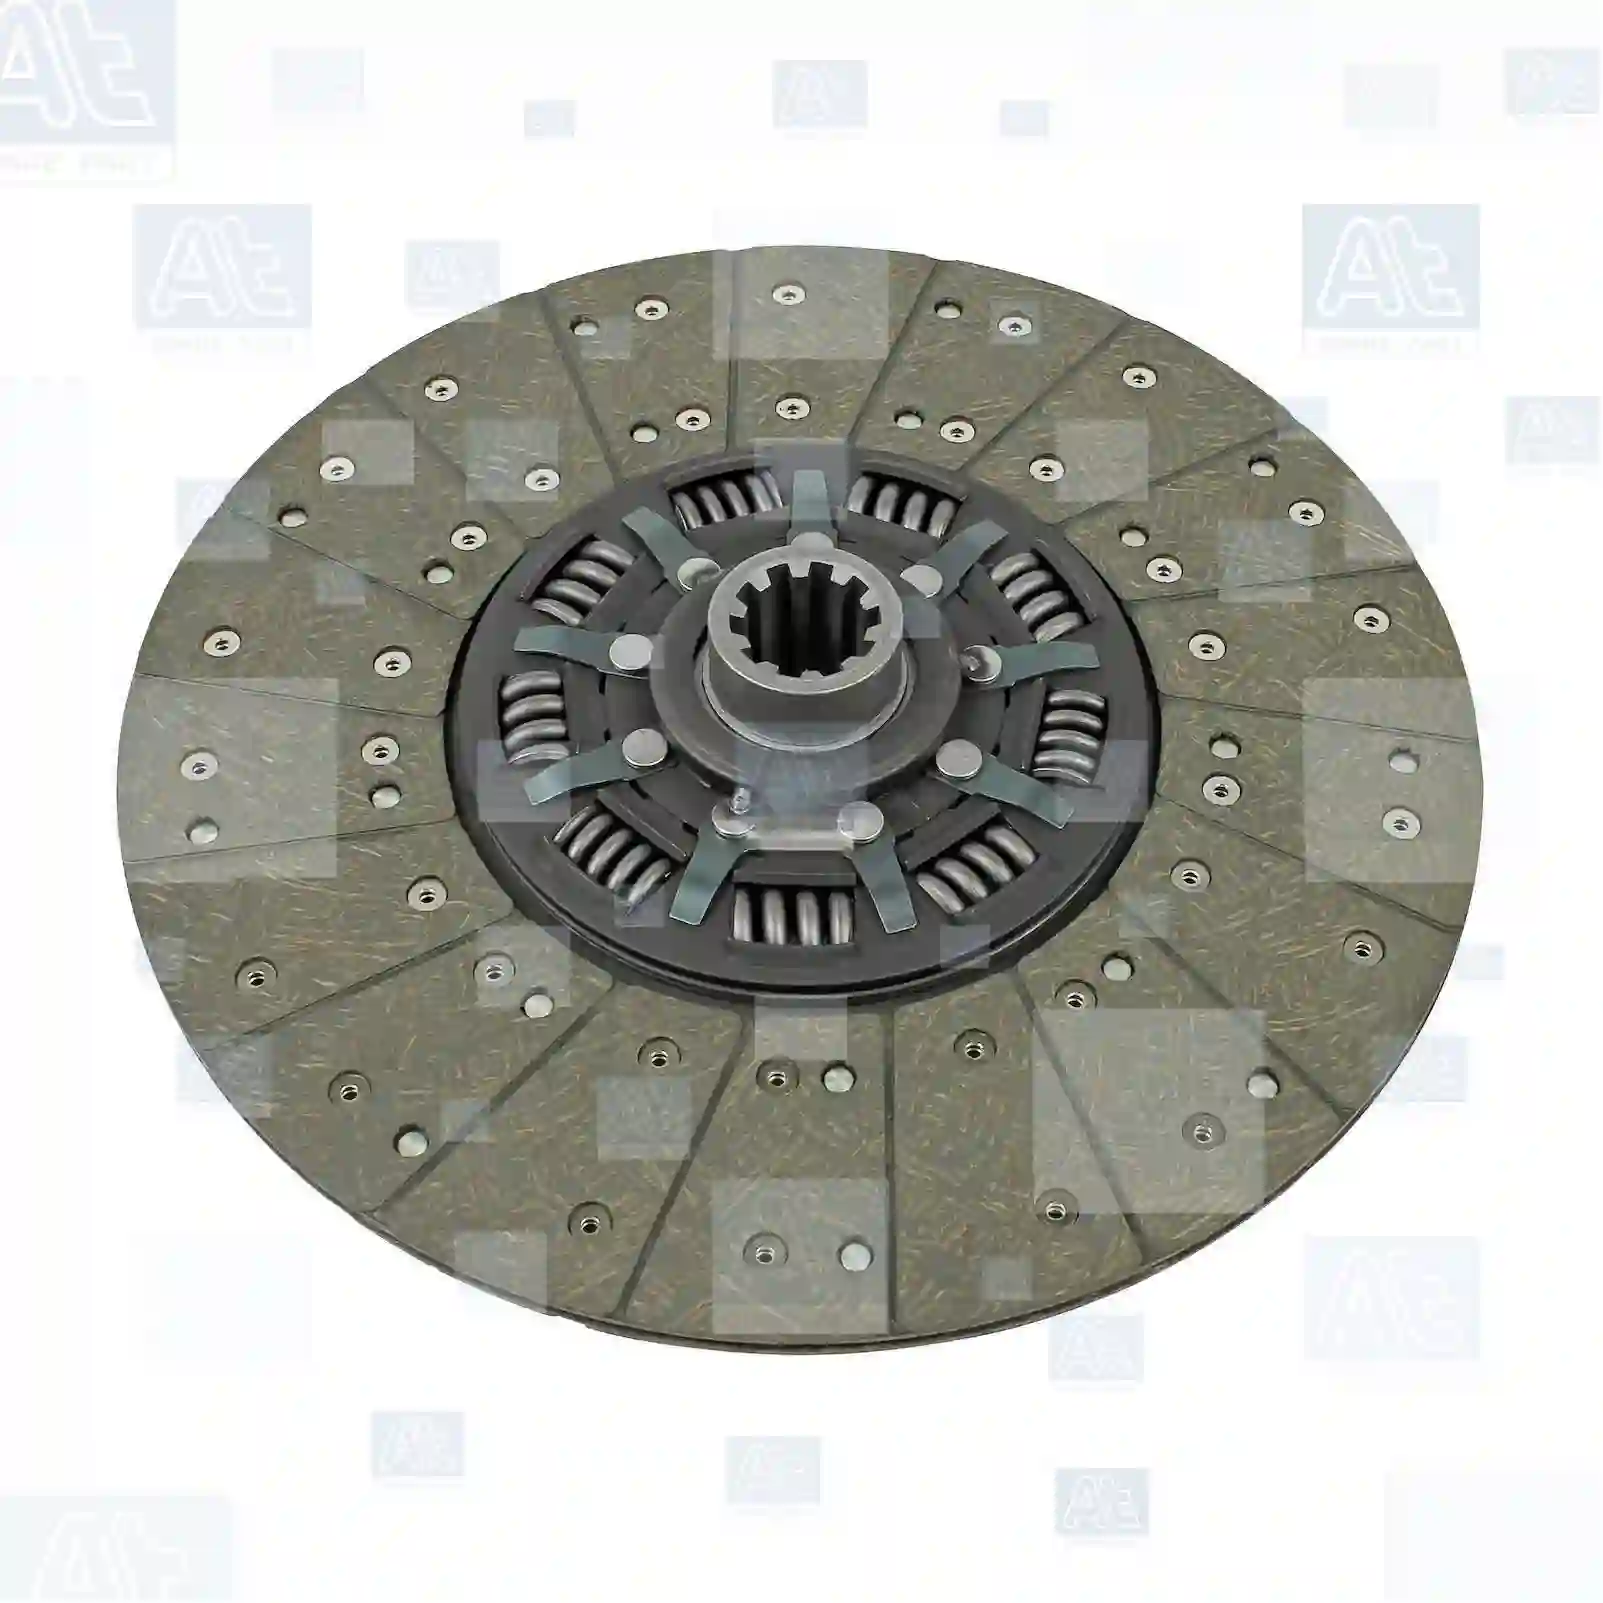 Clutch disc, 77721938, 01903883, 01903885, 01903888, 01903957, 01903958, 01903959, 01904700, 01904777, 42003637, 42037017, 42037018, 42062541, 42102171, 000250250100, 01903883, 01903885, 01903888, 01903958, 01903959, 01904700, 01904777, 42003637, 42037017, 42037018, 42062541, 42102171, 42132100, 5000822629, 81303010112, 81303010116, 81303010148, 81303010162, 81303010249, 81303010290, 81303010342, 81303010990, 81303016148, 81303019112, 81303019116, 81303019148, 81303019162, 81303019249, 81303019290, 81303019342, N1011009994, 0052502103, 0052502203, 0052502303, 0062508703, 0072500503, 0082509503, 0092502303, 0092504503, 0122501103, 0122502403, 0122502503, 0122502603, 012250260380, 0122503303, 0152503403, 0152503603, 0192503703, 0192503803, 6082500103, 011009994, 014008832, 040115100, 040142441, 042130700, 042130800, 042132100, 072500503, 81303010249, 81303010342, 5000278271, 5000822629, 5800207049, 8383185000, 8383260000, 8383312000, 83833120000, 83833120002, 5336236, 5483190, 5609004, 5616893, 5637071 ||  77721938 At Spare Part | Engine, Accelerator Pedal, Camshaft, Connecting Rod, Crankcase, Crankshaft, Cylinder Head, Engine Suspension Mountings, Exhaust Manifold, Exhaust Gas Recirculation, Filter Kits, Flywheel Housing, General Overhaul Kits, Engine, Intake Manifold, Oil Cleaner, Oil Cooler, Oil Filter, Oil Pump, Oil Sump, Piston & Liner, Sensor & Switch, Timing Case, Turbocharger, Cooling System, Belt Tensioner, Coolant Filter, Coolant Pipe, Corrosion Prevention Agent, Drive, Expansion Tank, Fan, Intercooler, Monitors & Gauges, Radiator, Thermostat, V-Belt / Timing belt, Water Pump, Fuel System, Electronical Injector Unit, Feed Pump, Fuel Filter, cpl., Fuel Gauge Sender,  Fuel Line, Fuel Pump, Fuel Tank, Injection Line Kit, Injection Pump, Exhaust System, Clutch & Pedal, Gearbox, Propeller Shaft, Axles, Brake System, Hubs & Wheels, Suspension, Leaf Spring, Universal Parts / Accessories, Steering, Electrical System, Cabin Clutch disc, 77721938, 01903883, 01903885, 01903888, 01903957, 01903958, 01903959, 01904700, 01904777, 42003637, 42037017, 42037018, 42062541, 42102171, 000250250100, 01903883, 01903885, 01903888, 01903958, 01903959, 01904700, 01904777, 42003637, 42037017, 42037018, 42062541, 42102171, 42132100, 5000822629, 81303010112, 81303010116, 81303010148, 81303010162, 81303010249, 81303010290, 81303010342, 81303010990, 81303016148, 81303019112, 81303019116, 81303019148, 81303019162, 81303019249, 81303019290, 81303019342, N1011009994, 0052502103, 0052502203, 0052502303, 0062508703, 0072500503, 0082509503, 0092502303, 0092504503, 0122501103, 0122502403, 0122502503, 0122502603, 012250260380, 0122503303, 0152503403, 0152503603, 0192503703, 0192503803, 6082500103, 011009994, 014008832, 040115100, 040142441, 042130700, 042130800, 042132100, 072500503, 81303010249, 81303010342, 5000278271, 5000822629, 5800207049, 8383185000, 8383260000, 8383312000, 83833120000, 83833120002, 5336236, 5483190, 5609004, 5616893, 5637071 ||  77721938 At Spare Part | Engine, Accelerator Pedal, Camshaft, Connecting Rod, Crankcase, Crankshaft, Cylinder Head, Engine Suspension Mountings, Exhaust Manifold, Exhaust Gas Recirculation, Filter Kits, Flywheel Housing, General Overhaul Kits, Engine, Intake Manifold, Oil Cleaner, Oil Cooler, Oil Filter, Oil Pump, Oil Sump, Piston & Liner, Sensor & Switch, Timing Case, Turbocharger, Cooling System, Belt Tensioner, Coolant Filter, Coolant Pipe, Corrosion Prevention Agent, Drive, Expansion Tank, Fan, Intercooler, Monitors & Gauges, Radiator, Thermostat, V-Belt / Timing belt, Water Pump, Fuel System, Electronical Injector Unit, Feed Pump, Fuel Filter, cpl., Fuel Gauge Sender,  Fuel Line, Fuel Pump, Fuel Tank, Injection Line Kit, Injection Pump, Exhaust System, Clutch & Pedal, Gearbox, Propeller Shaft, Axles, Brake System, Hubs & Wheels, Suspension, Leaf Spring, Universal Parts / Accessories, Steering, Electrical System, Cabin